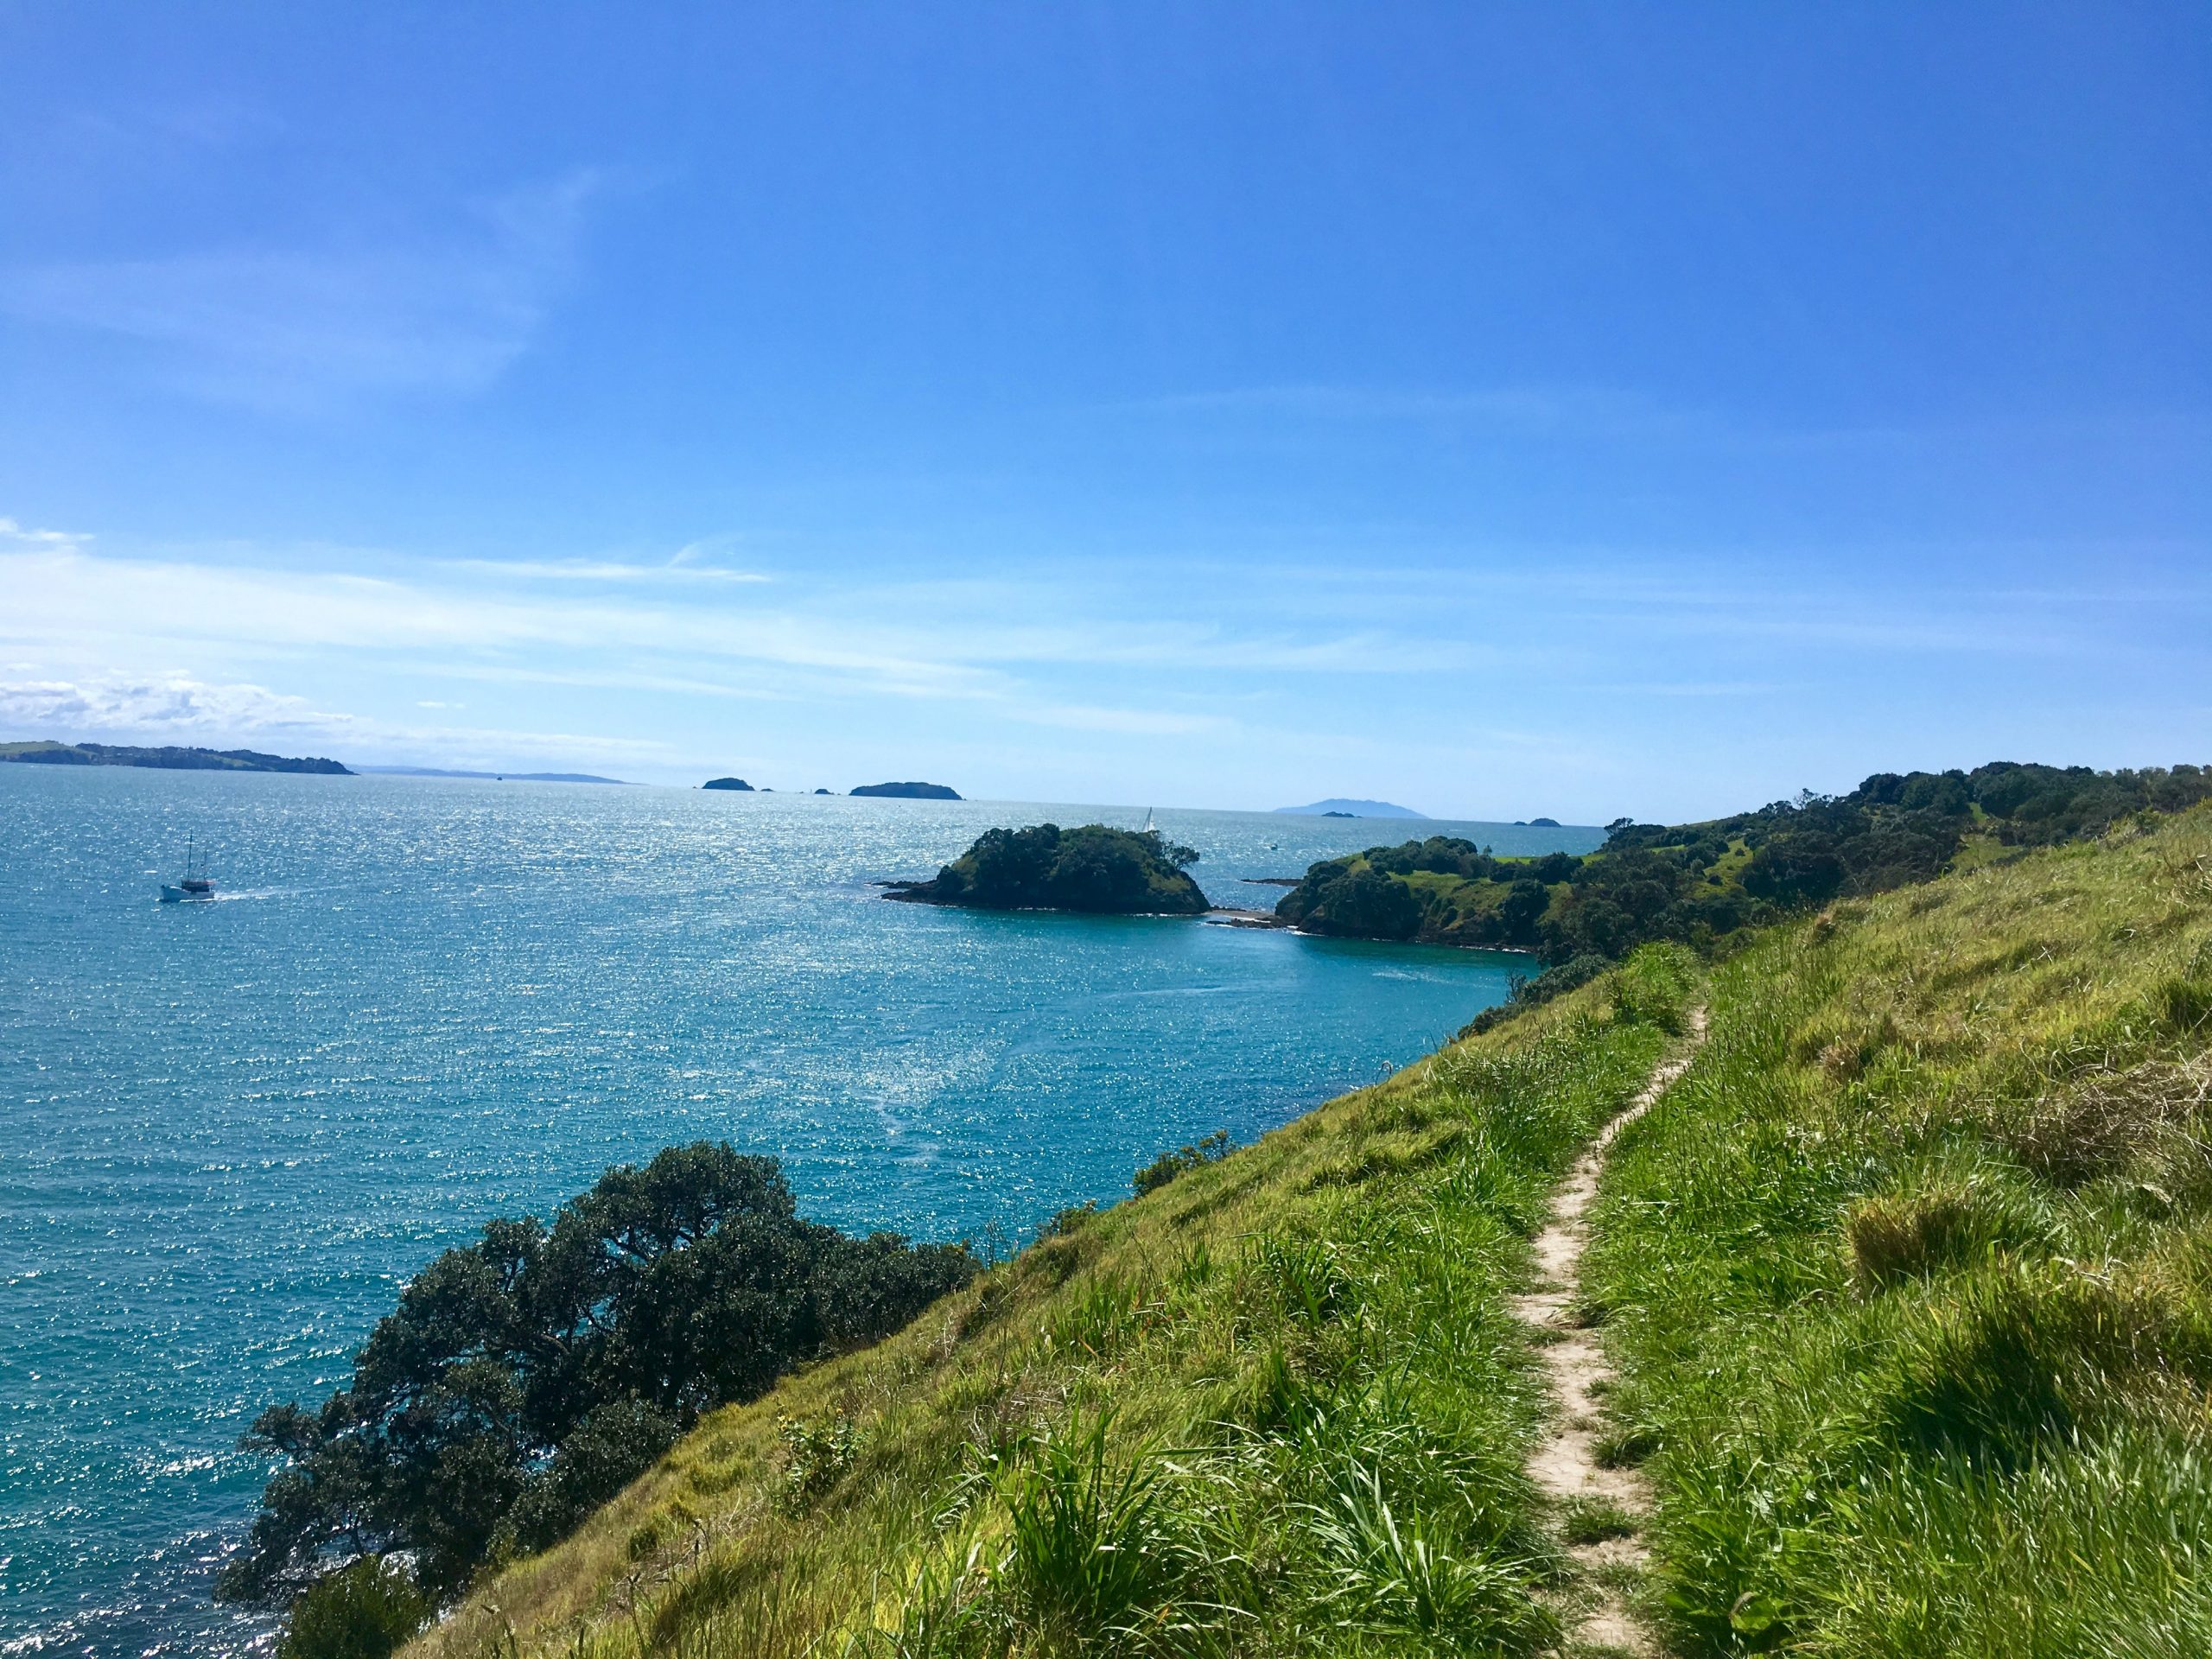 A grassy path on a headland with blue ocean and small islands dotted to the left.